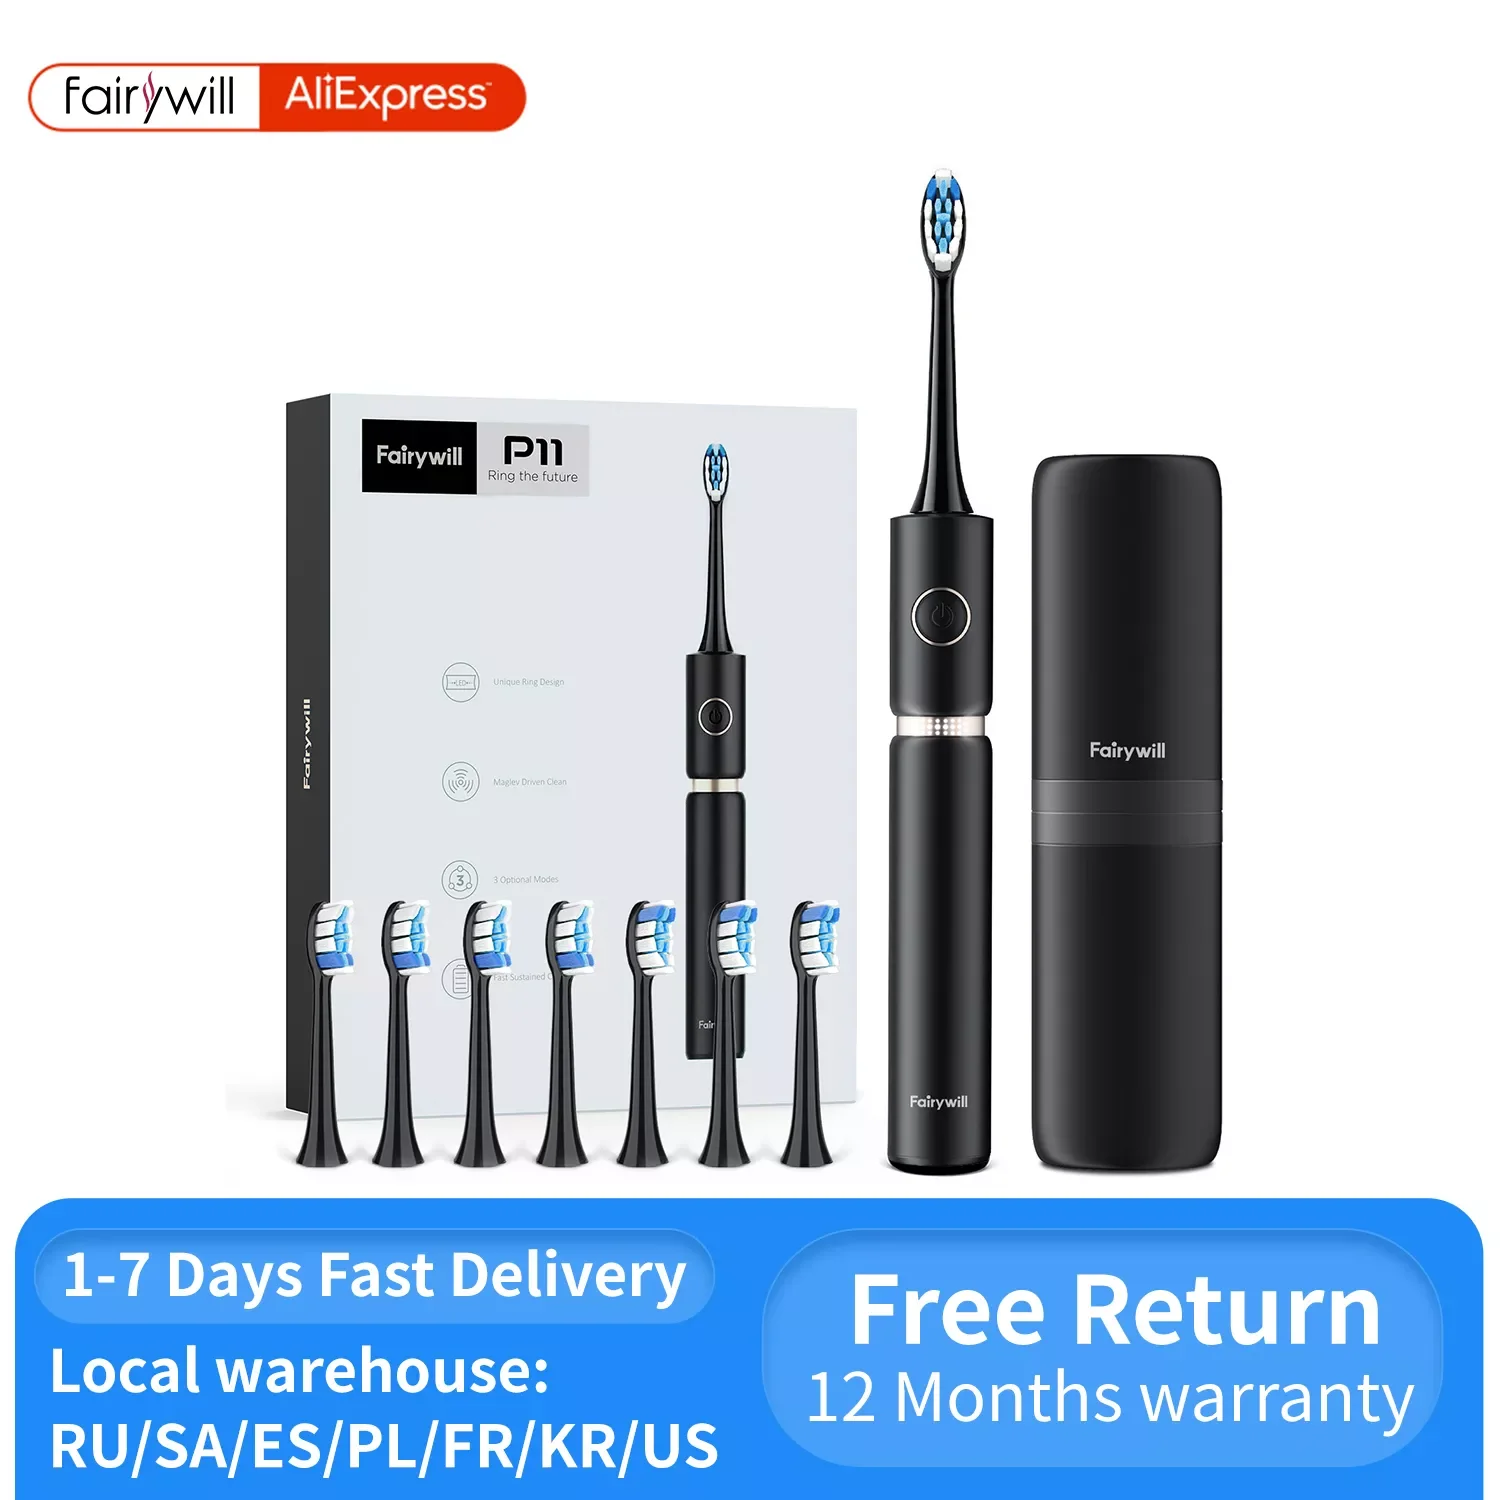 Fairywill P11 Sonic Whitening Electric Toothbrush Rechargeable USB Charger Ultra Powerful Waterproof 4 Heads and 1 Travel Case enlarge